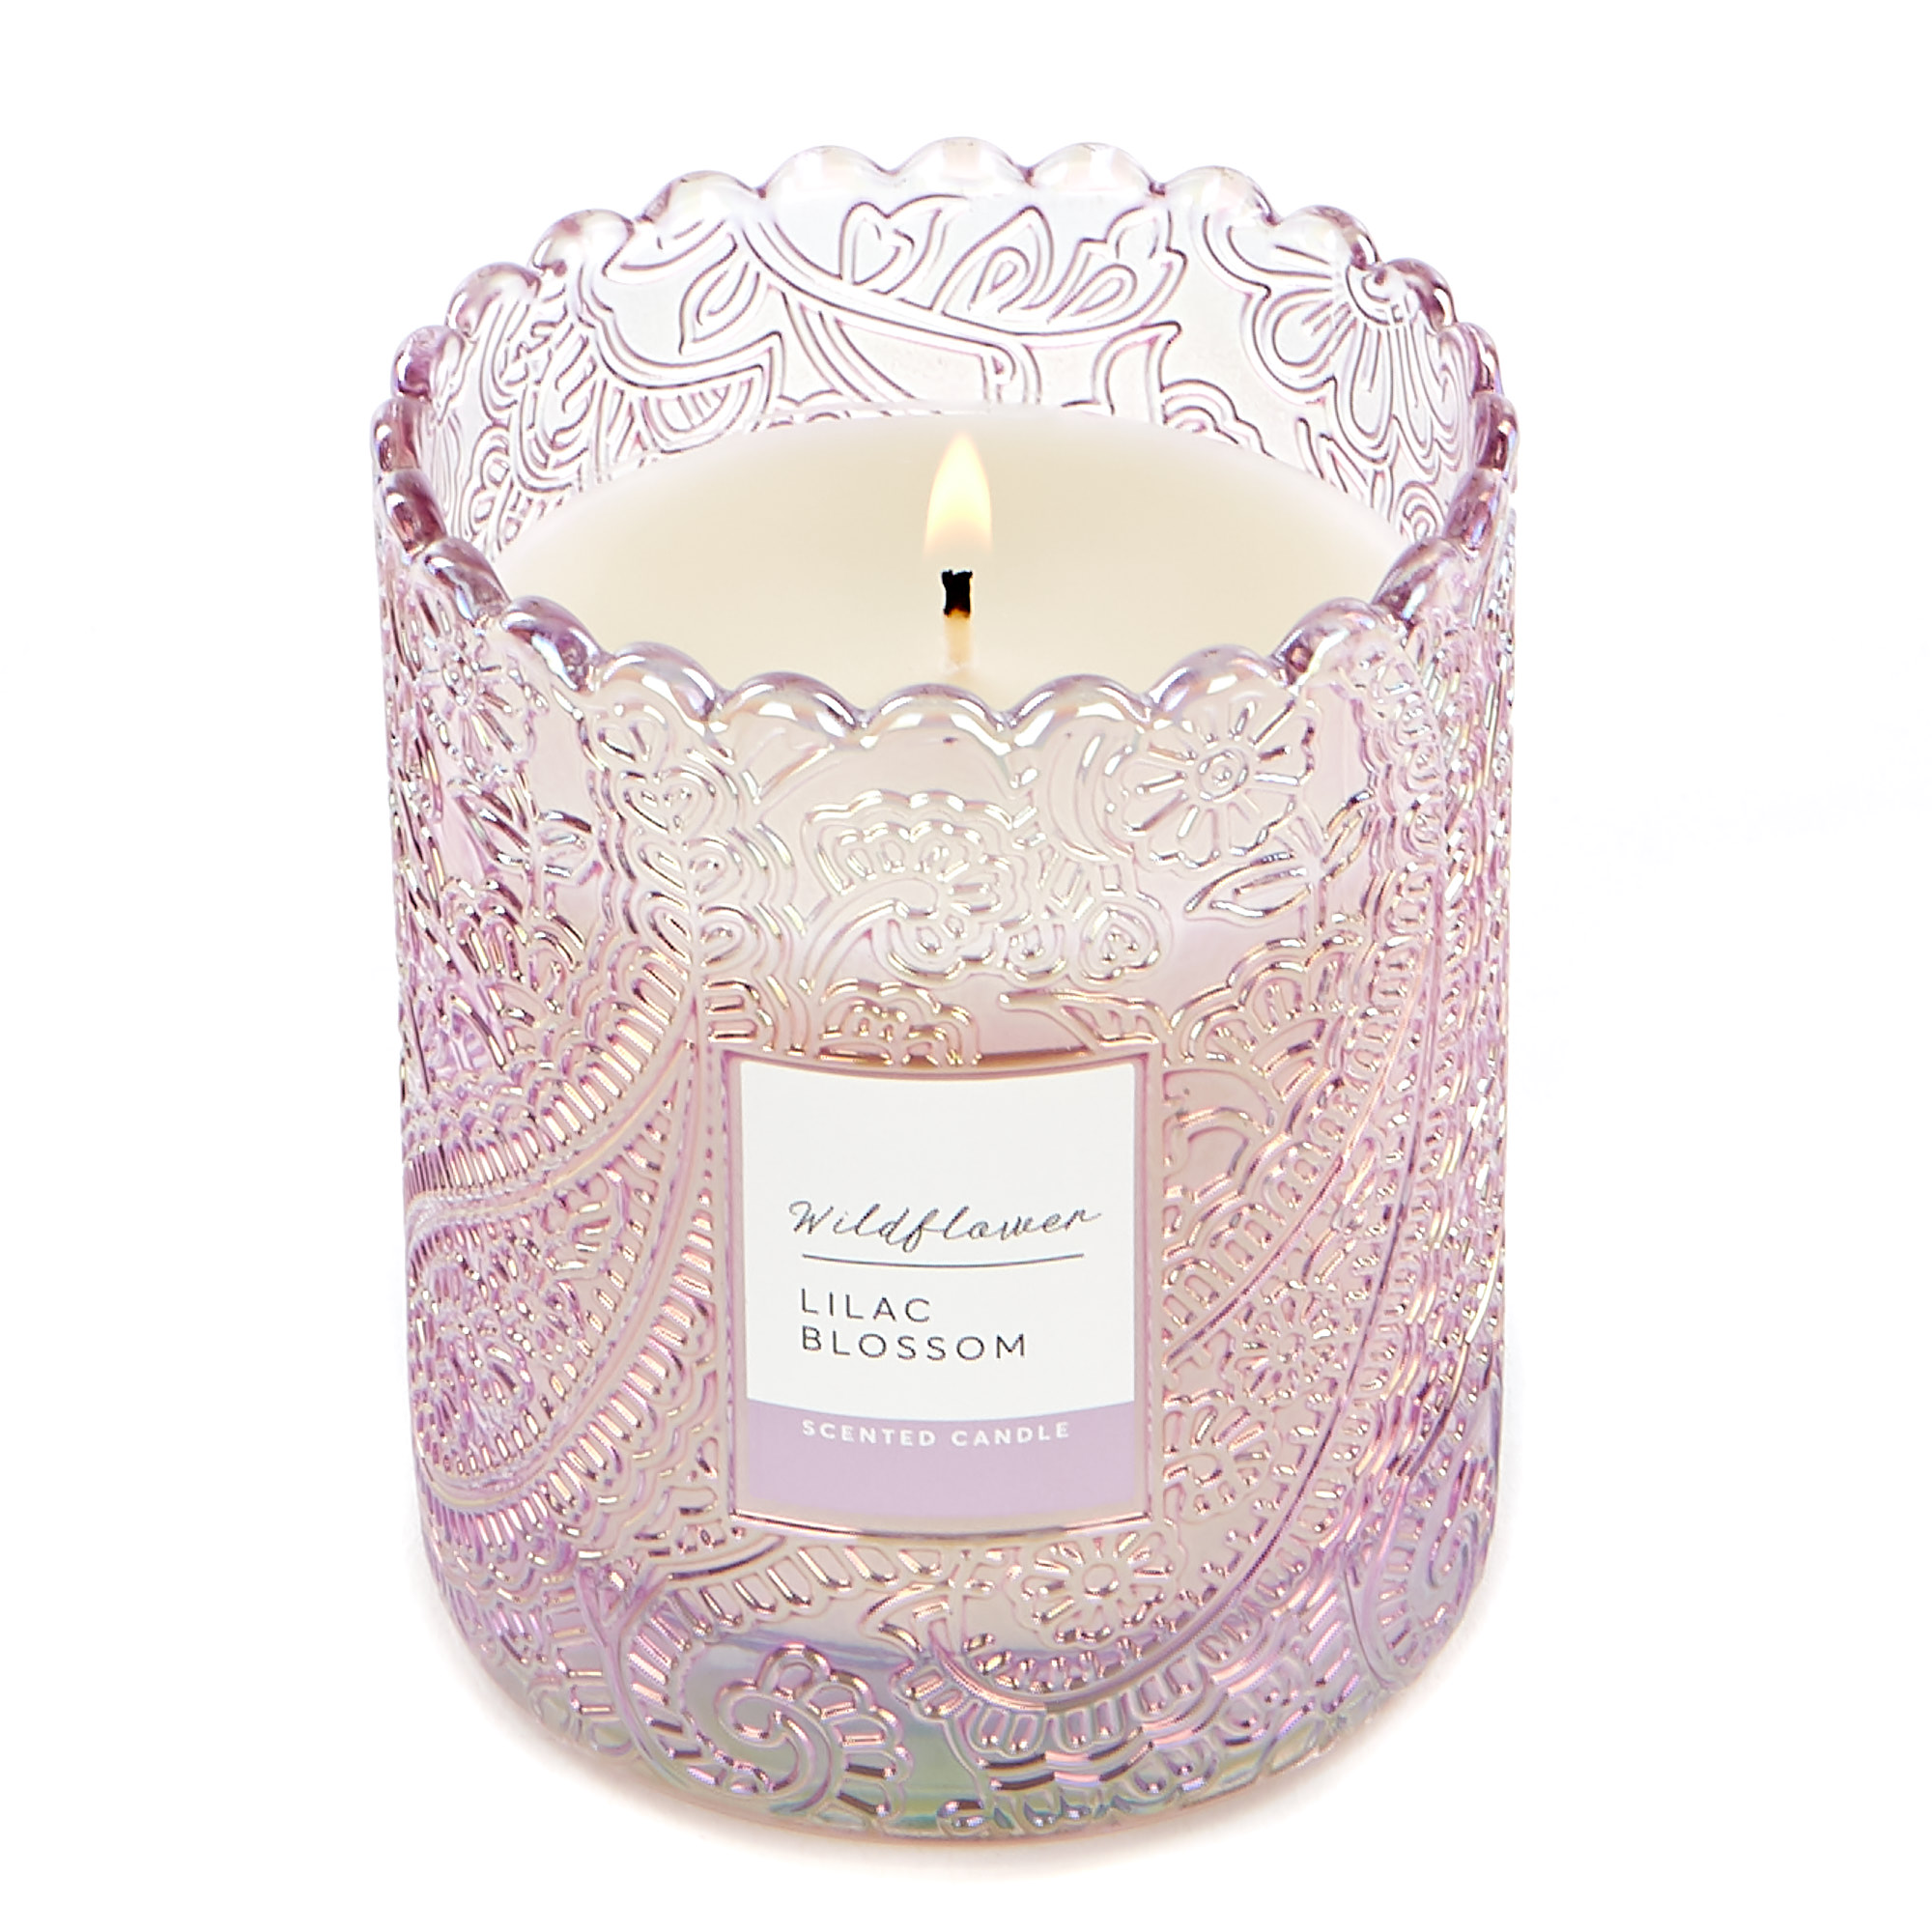 Wildflower Lilac Blossom Scented Candle